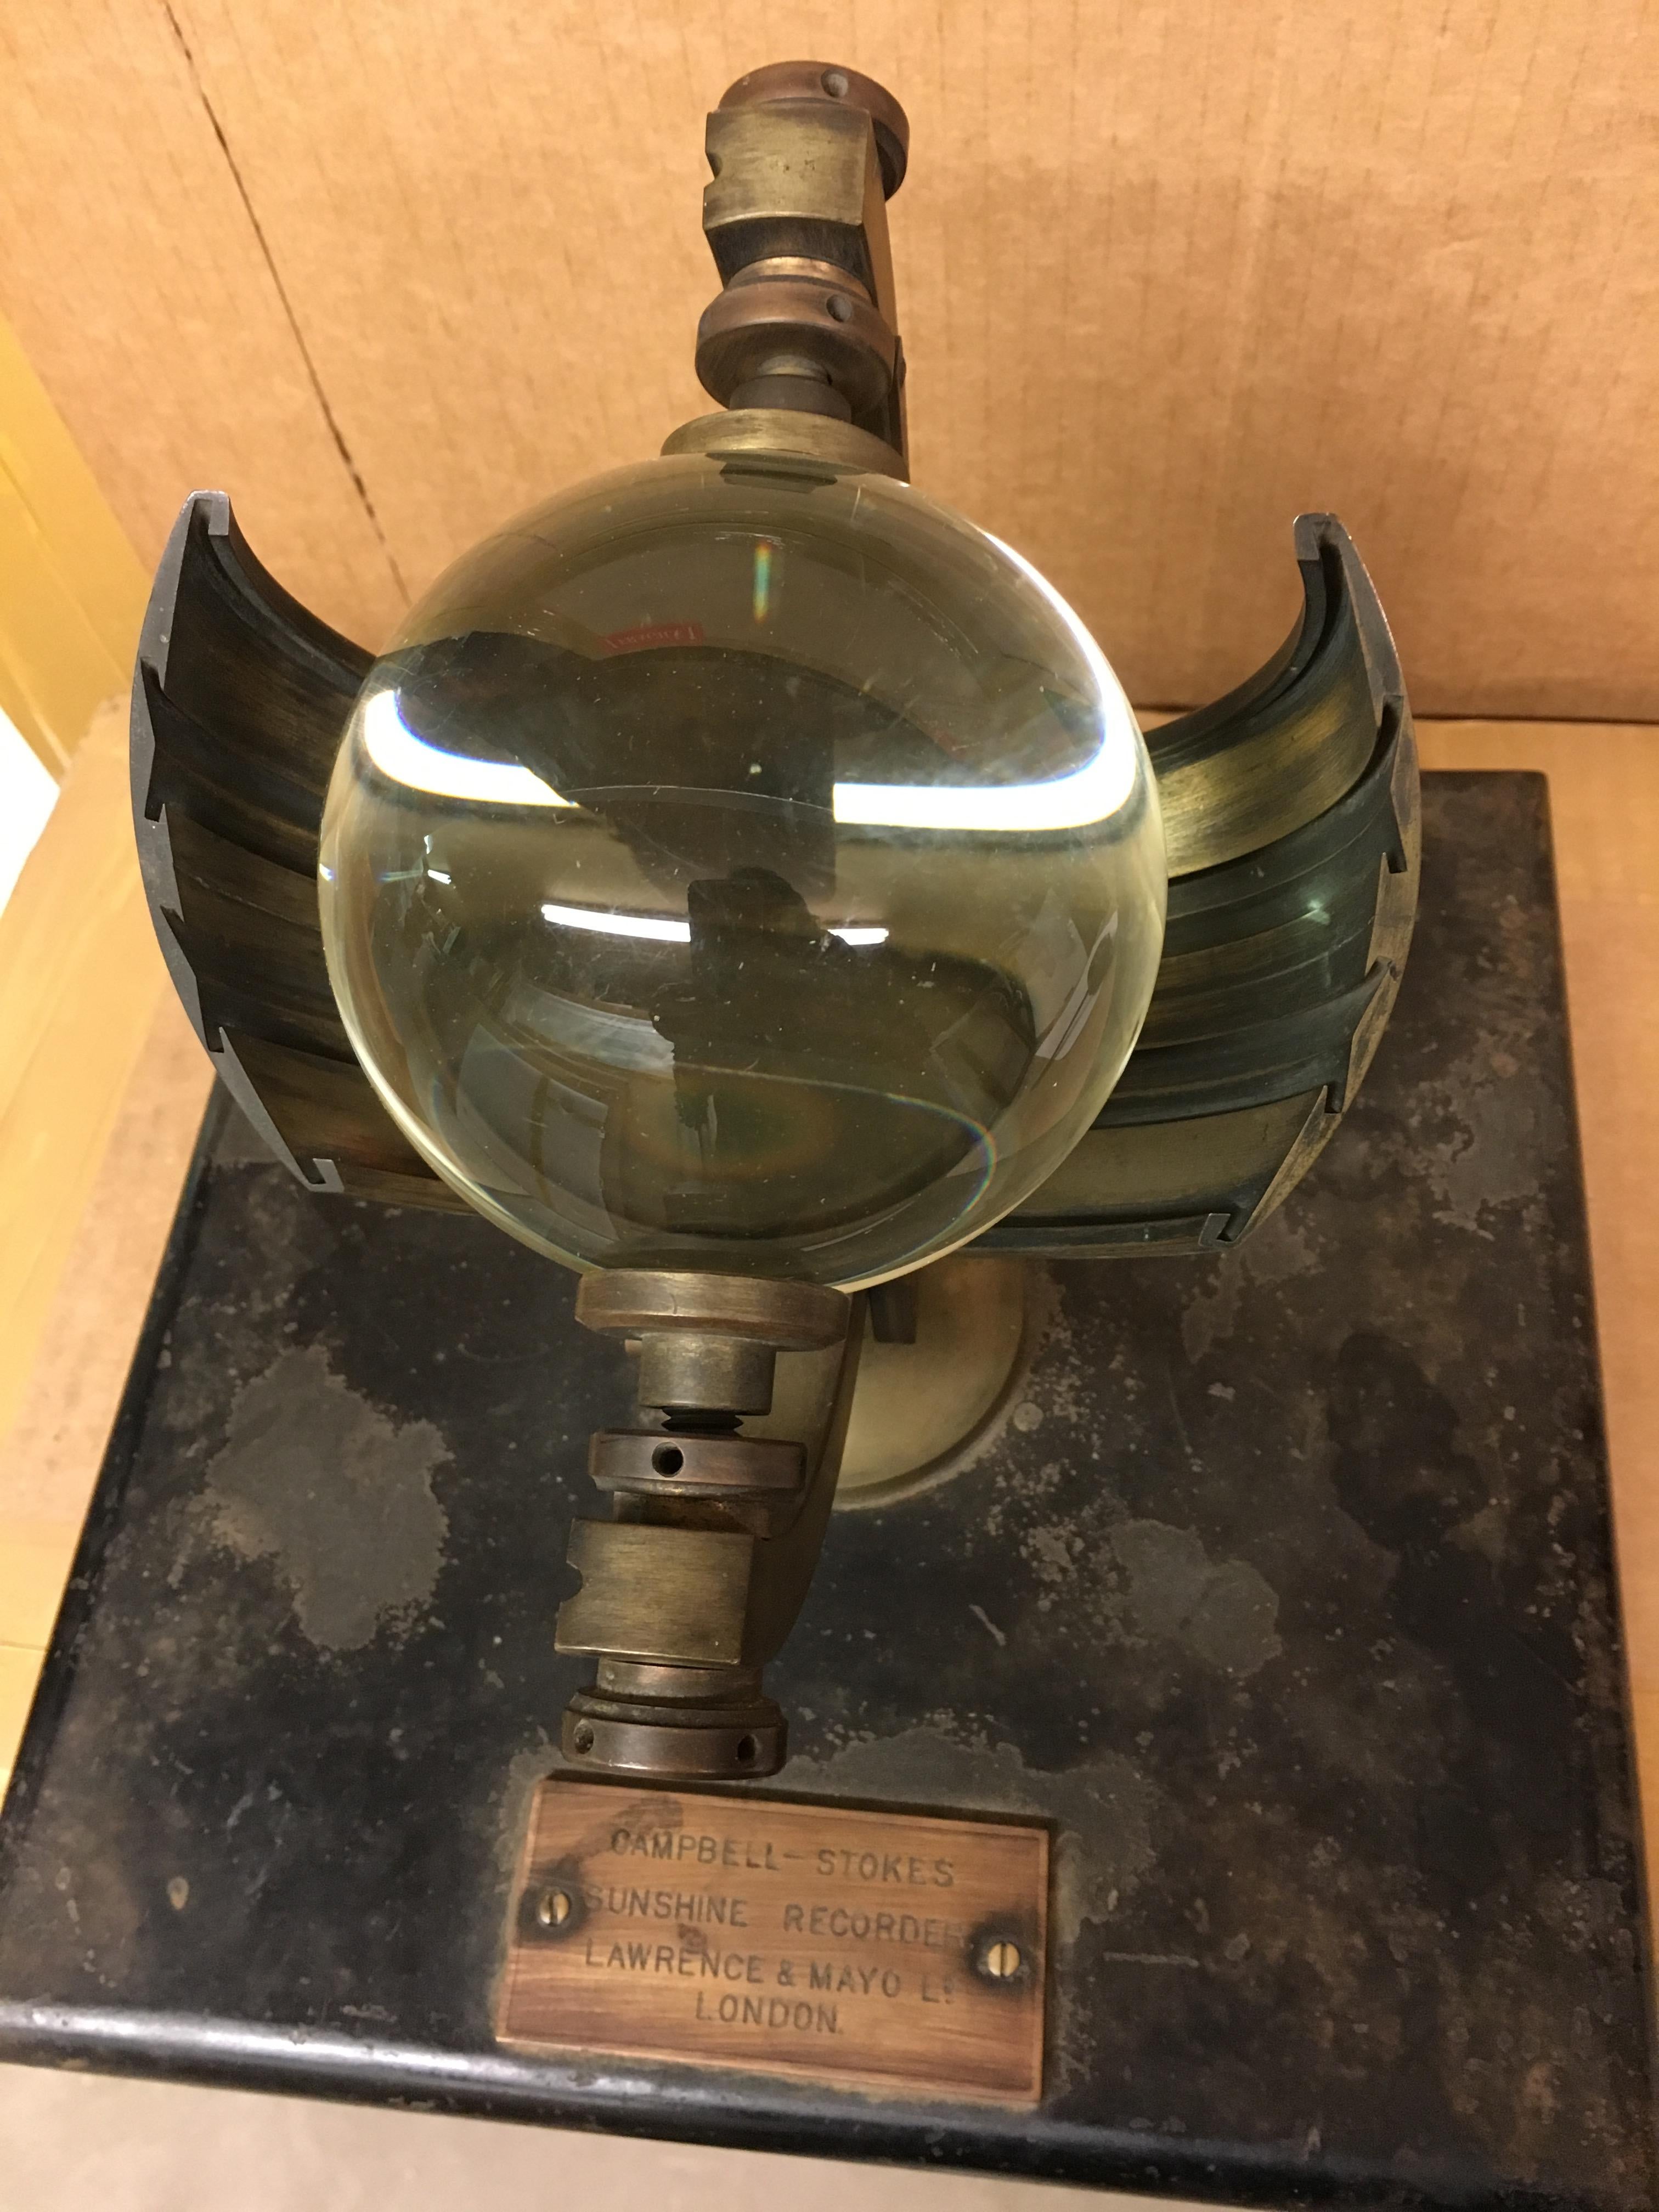 Brass Campbell Stokes Sunshine Recorder by Lawrence and Mayo, London